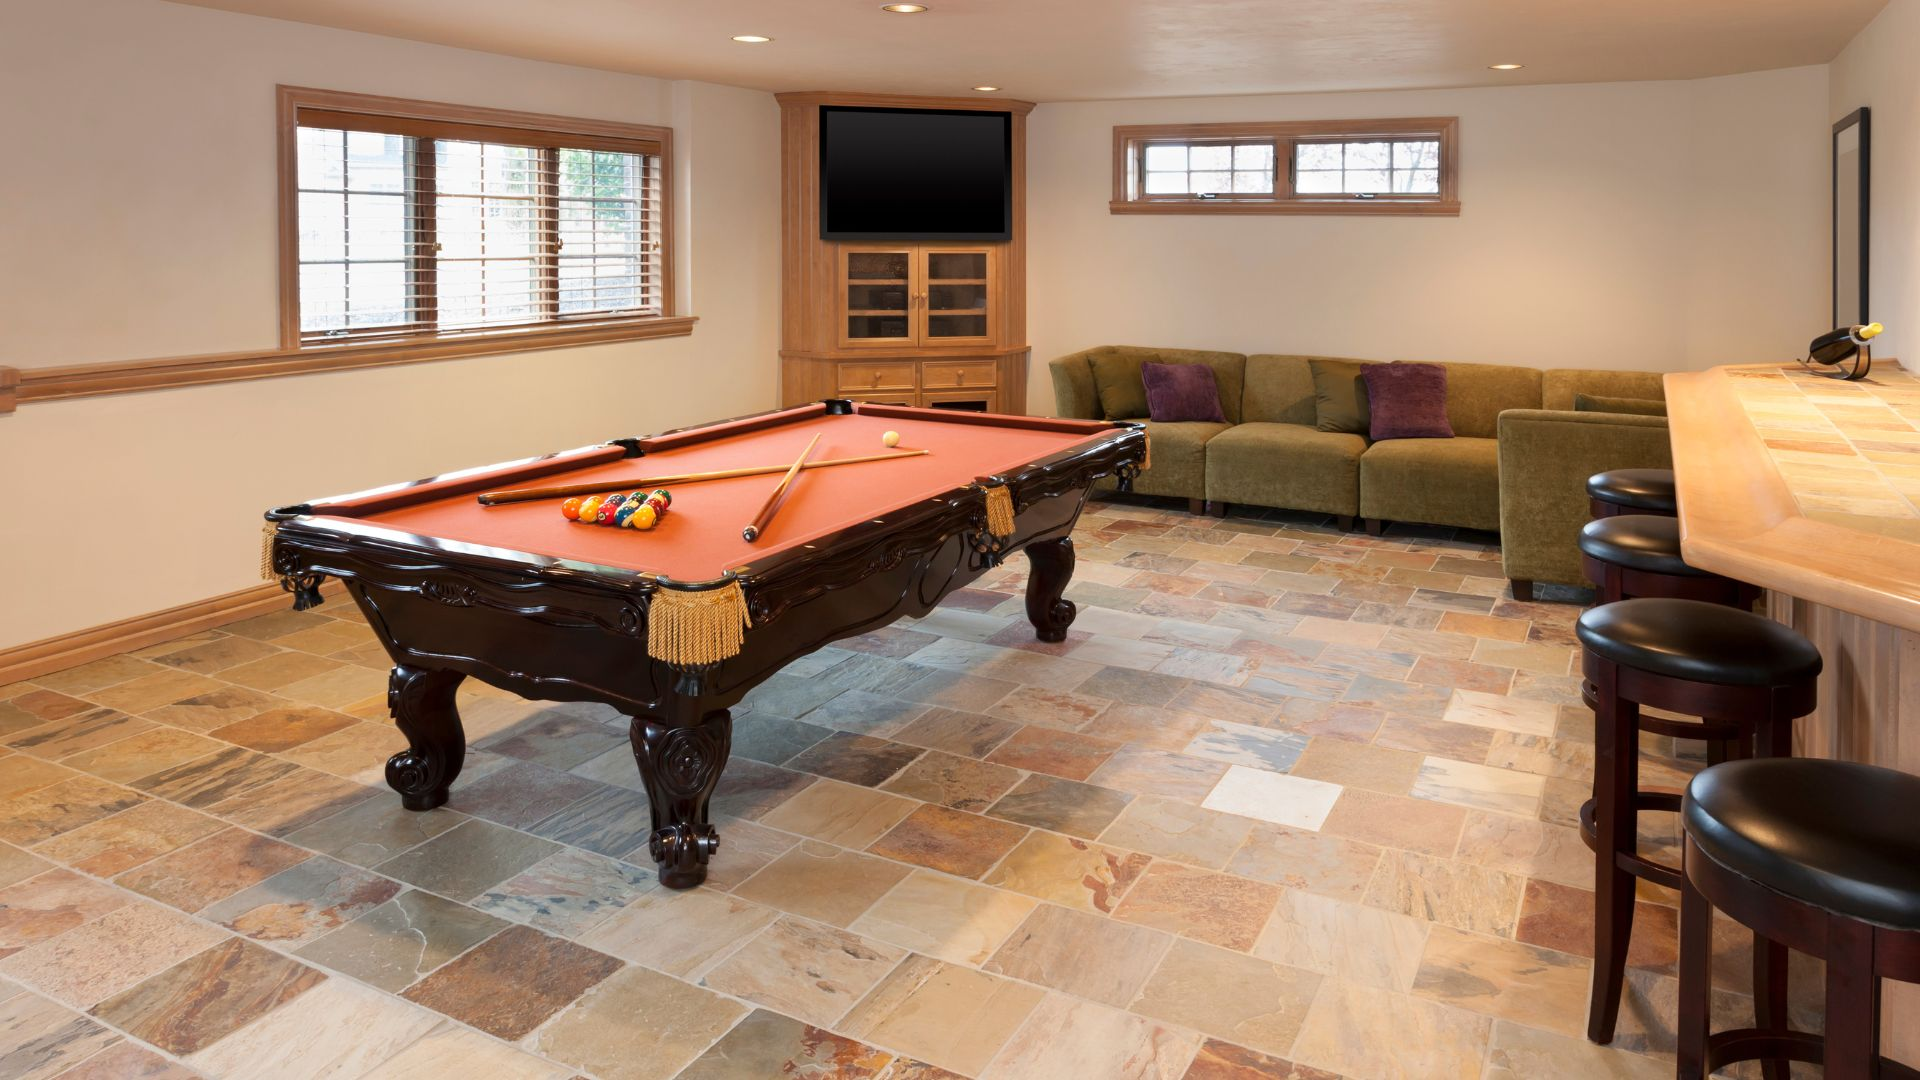 What are the variables affecting the overall cost of your basement renovation?